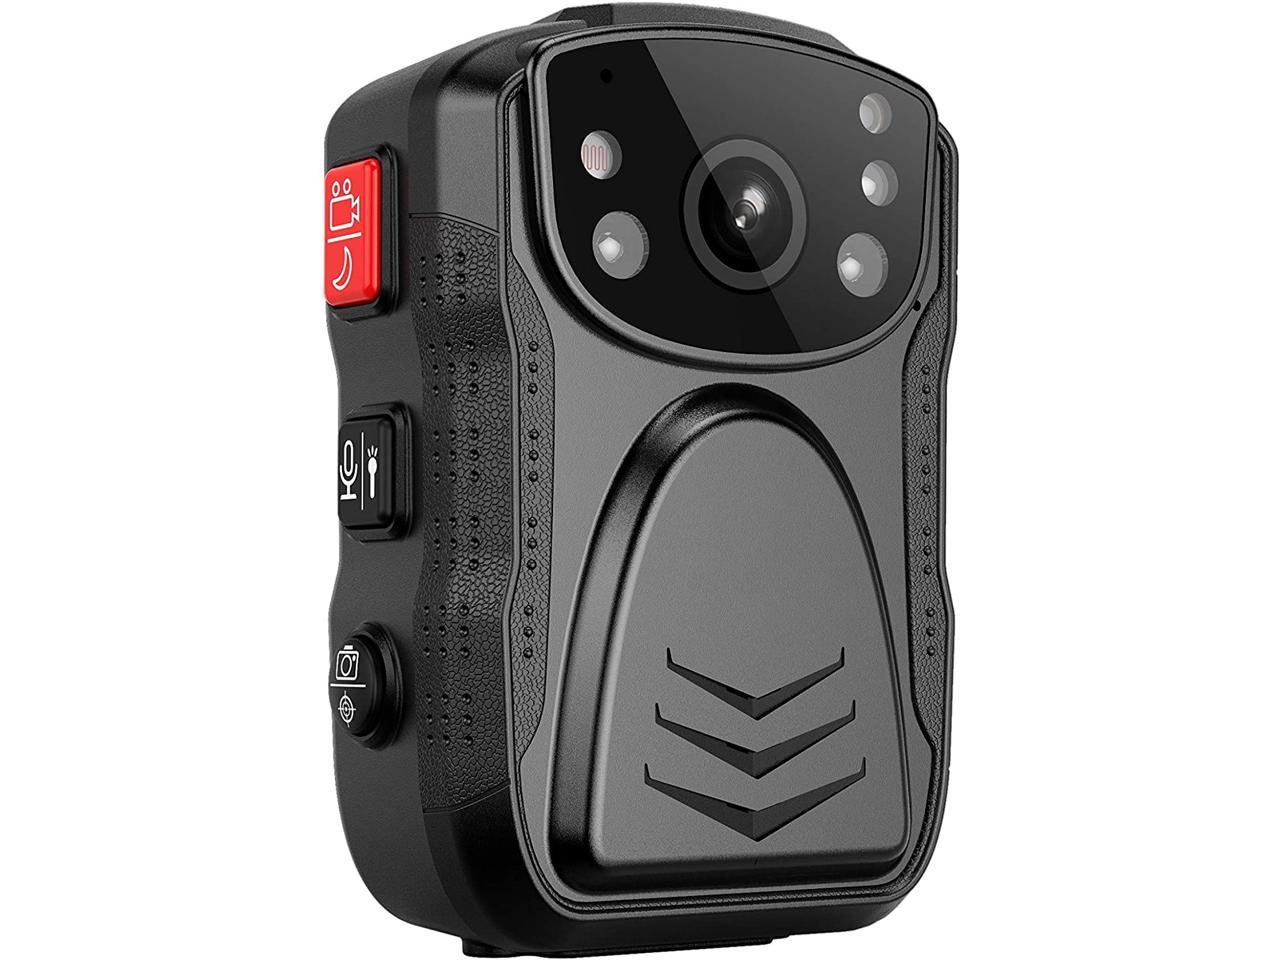 Waterproof Body Worn Camera with Compact Design Shockproof OmniMaster 1296P UHD Body Camera with Audio 2 Inch Display Build-in 64GB Night Vision 